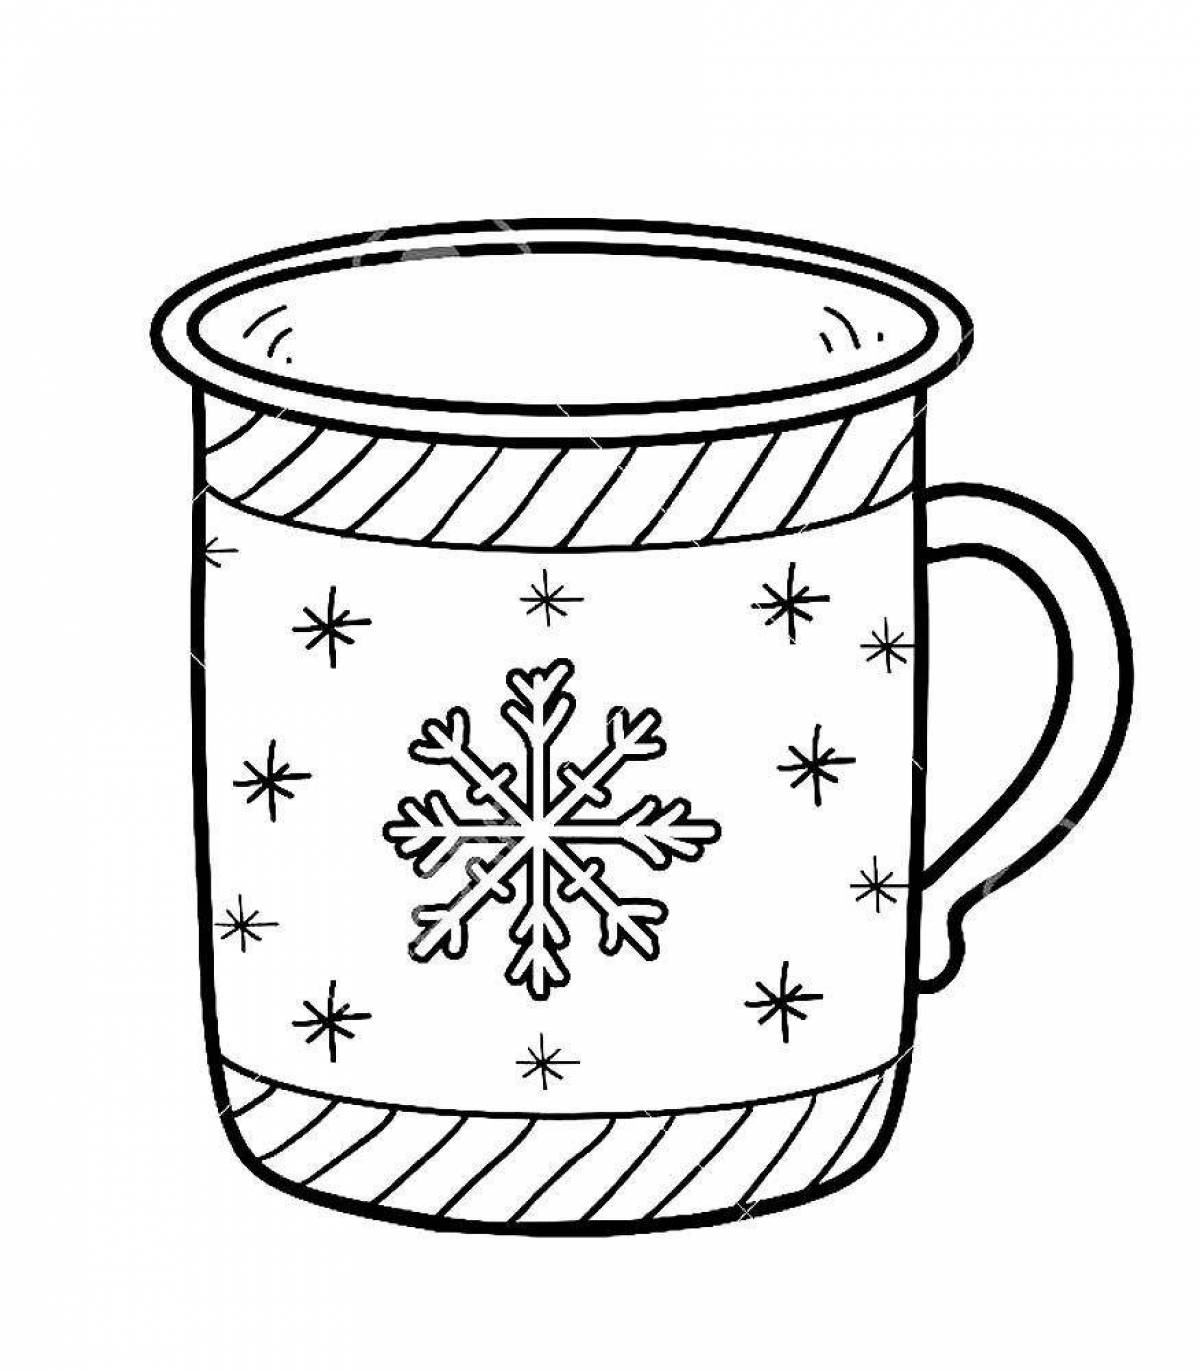 Coloring book jubilant cup for children